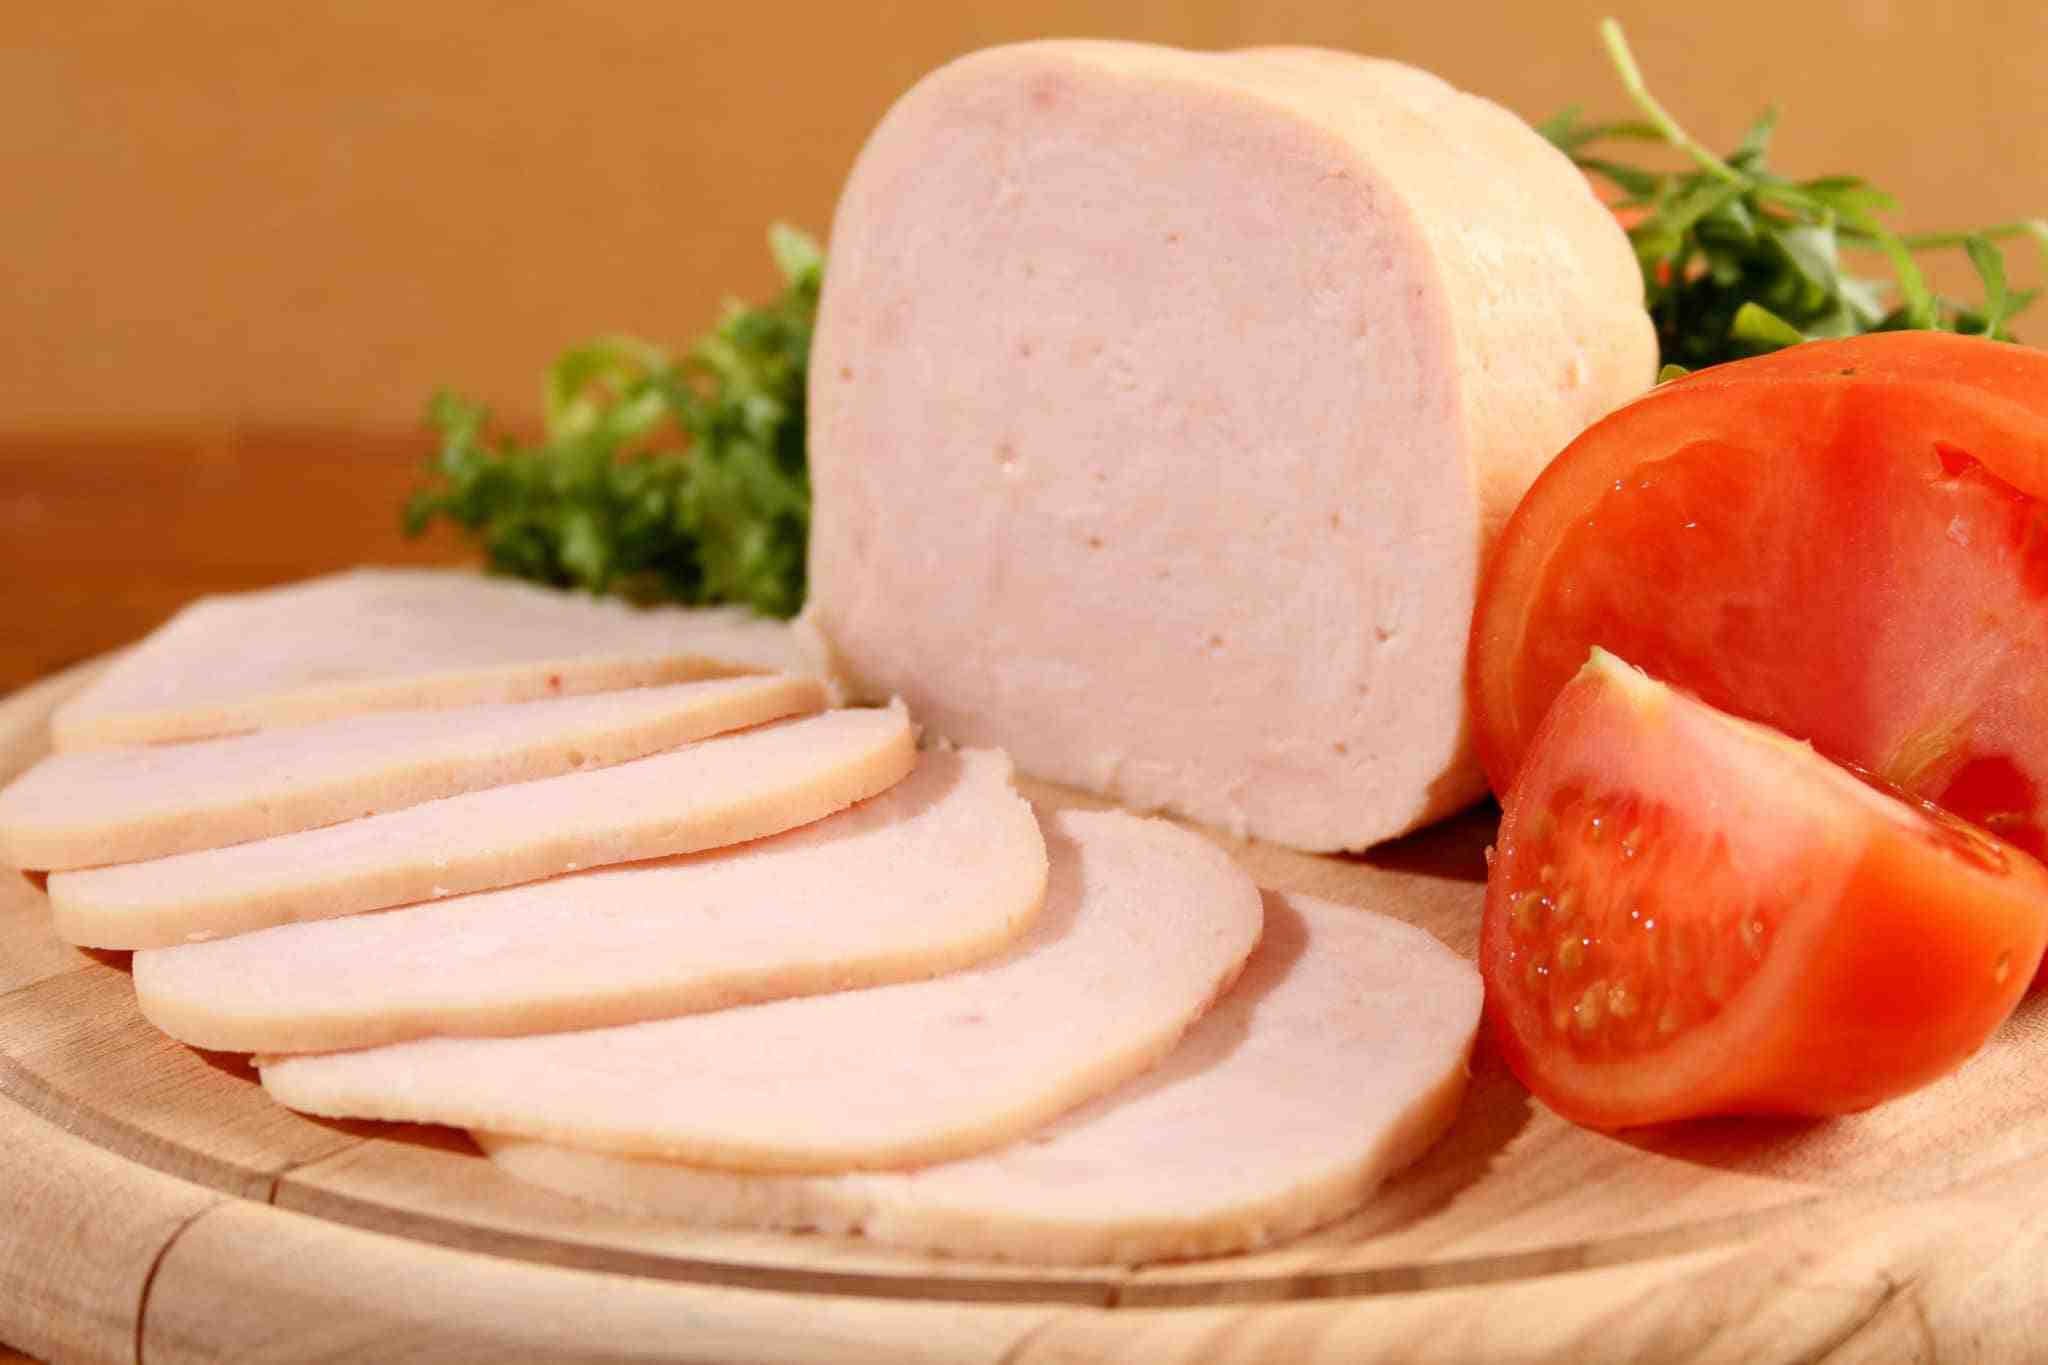 Does ham make you gain weight?